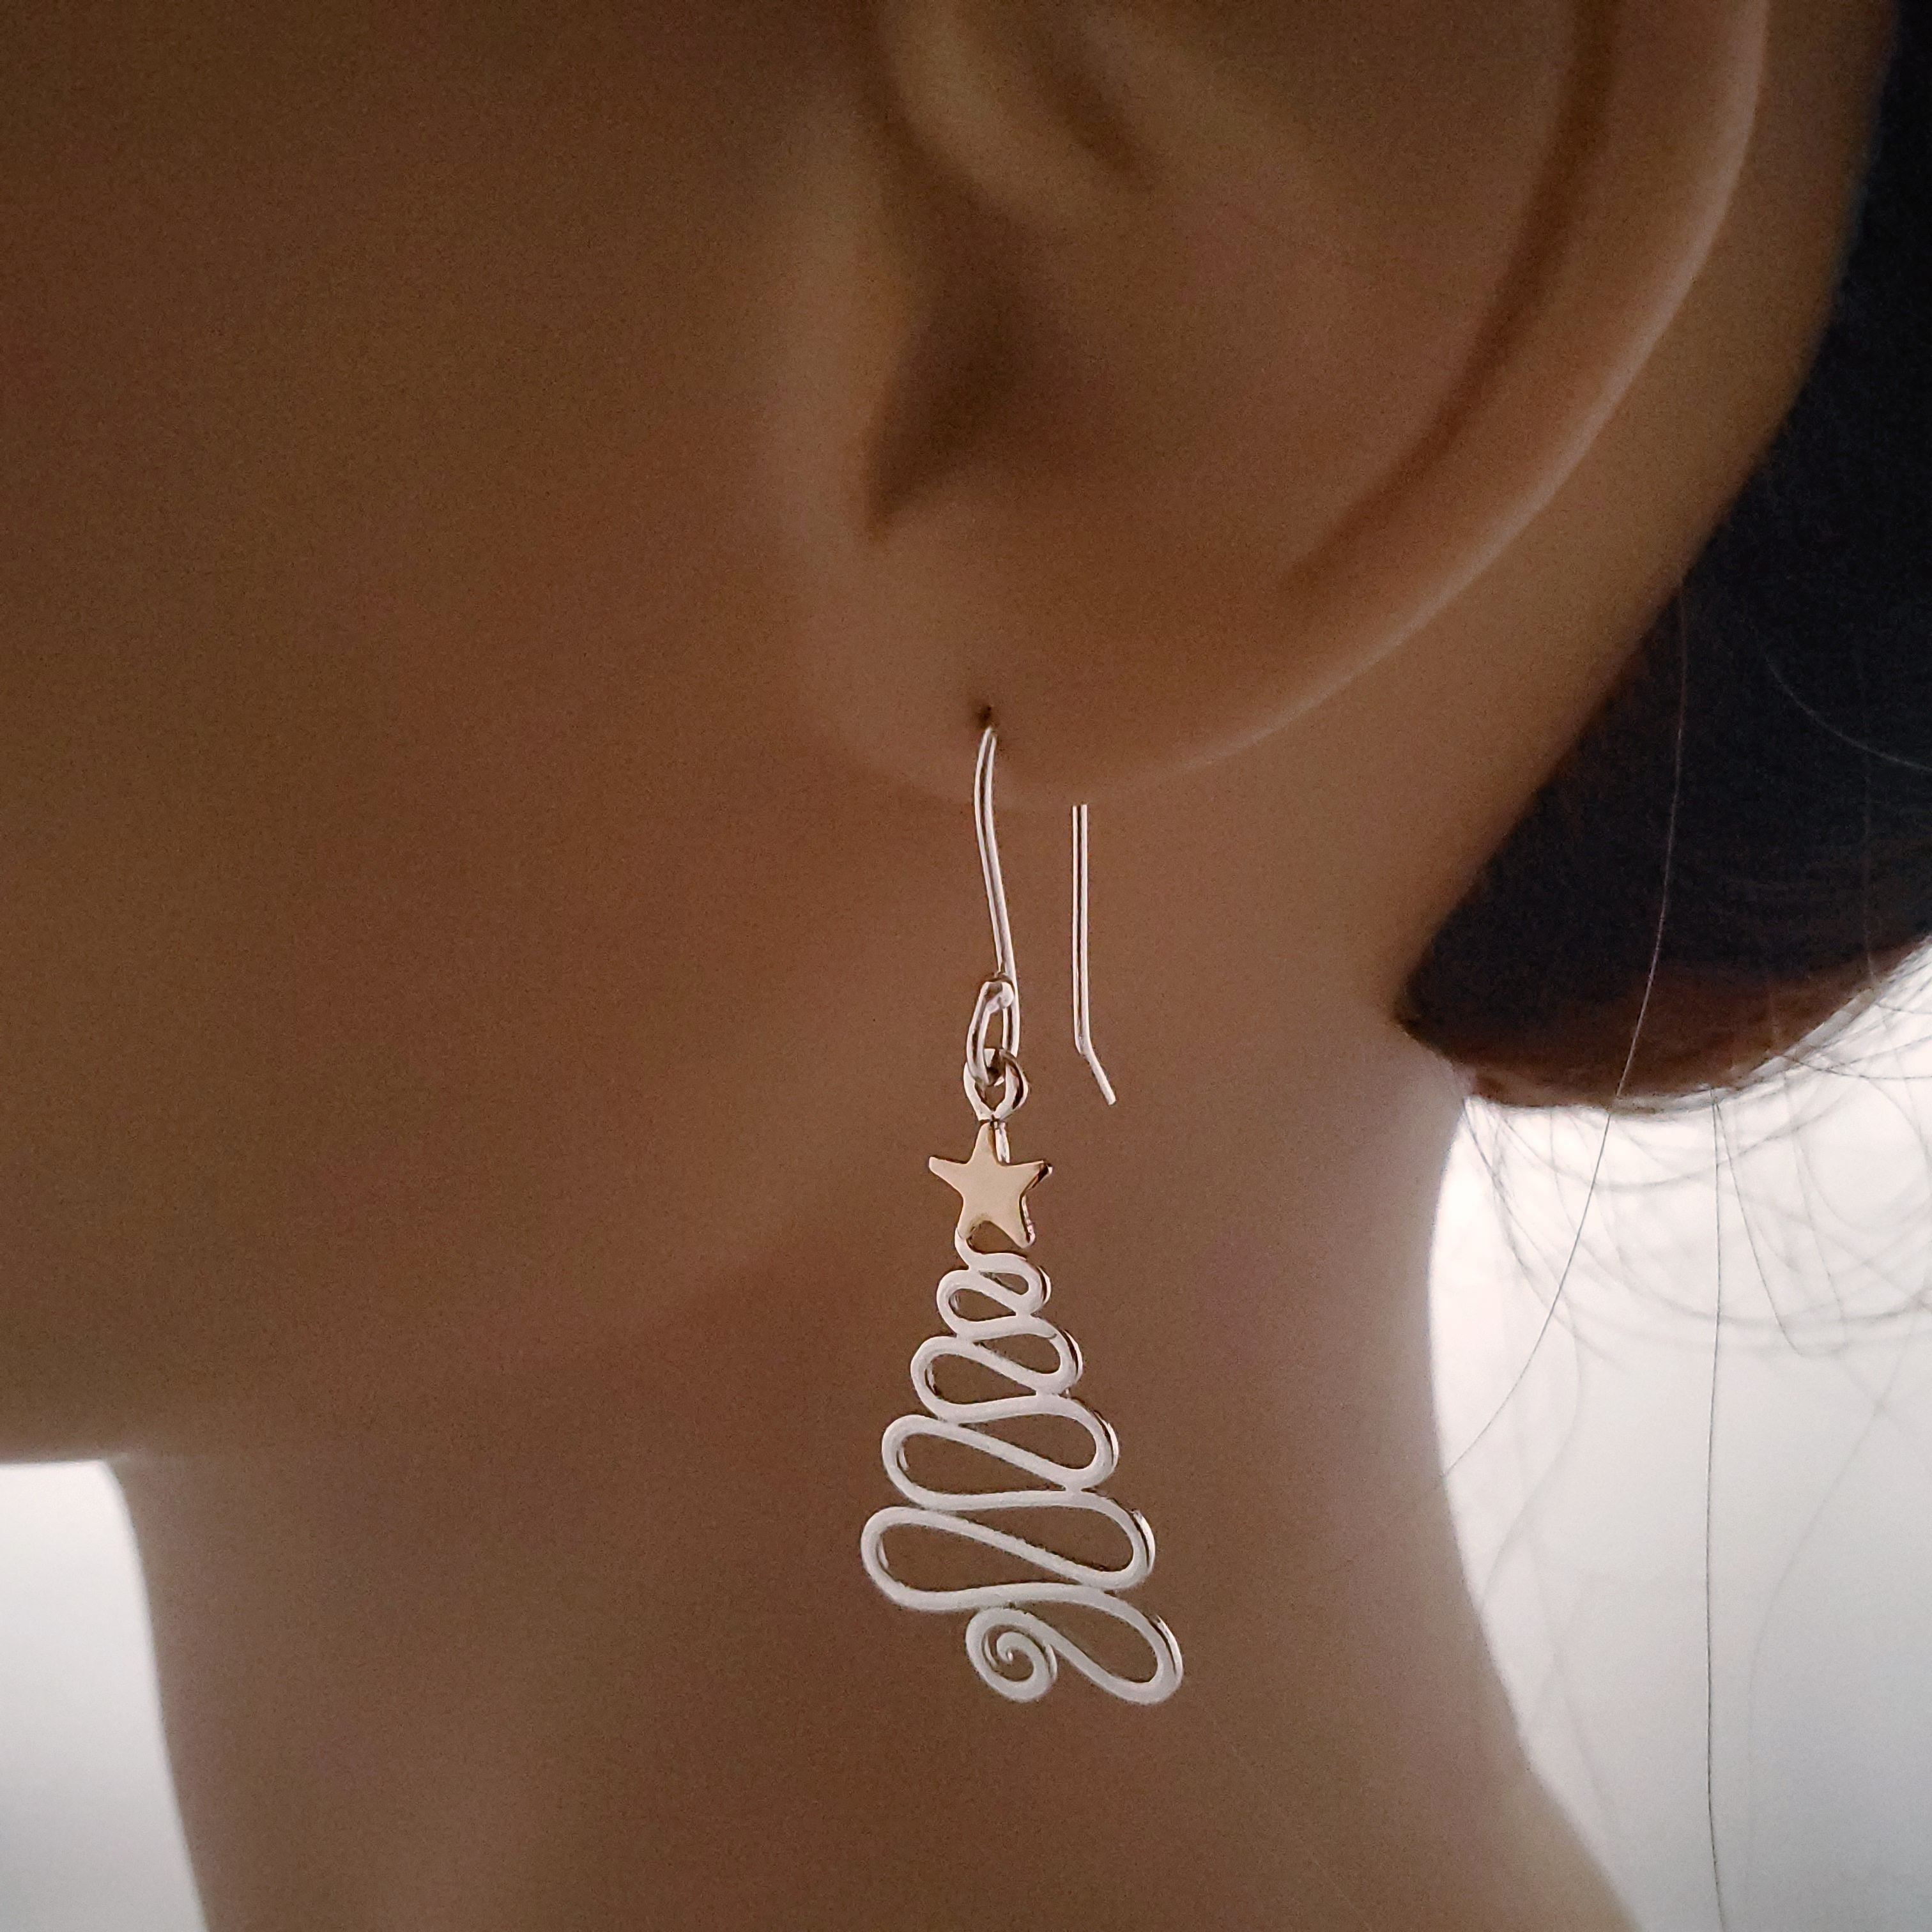 Swirly silver Christmas tree earrings with gold-filled star